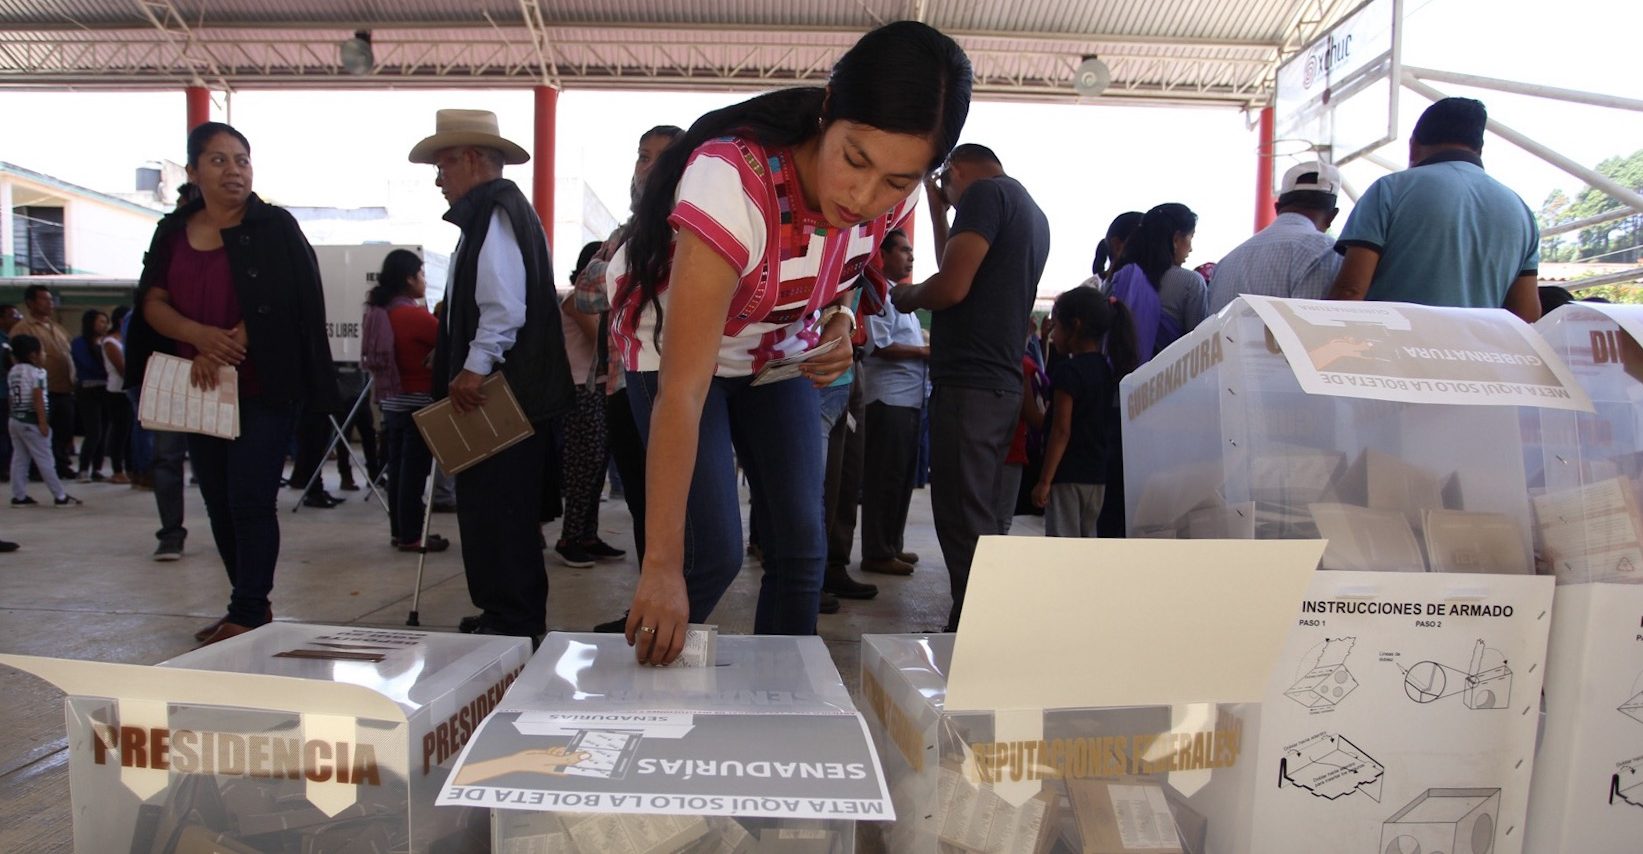 They won but a man would replace them: Councillors and deputies resign in Chiapas